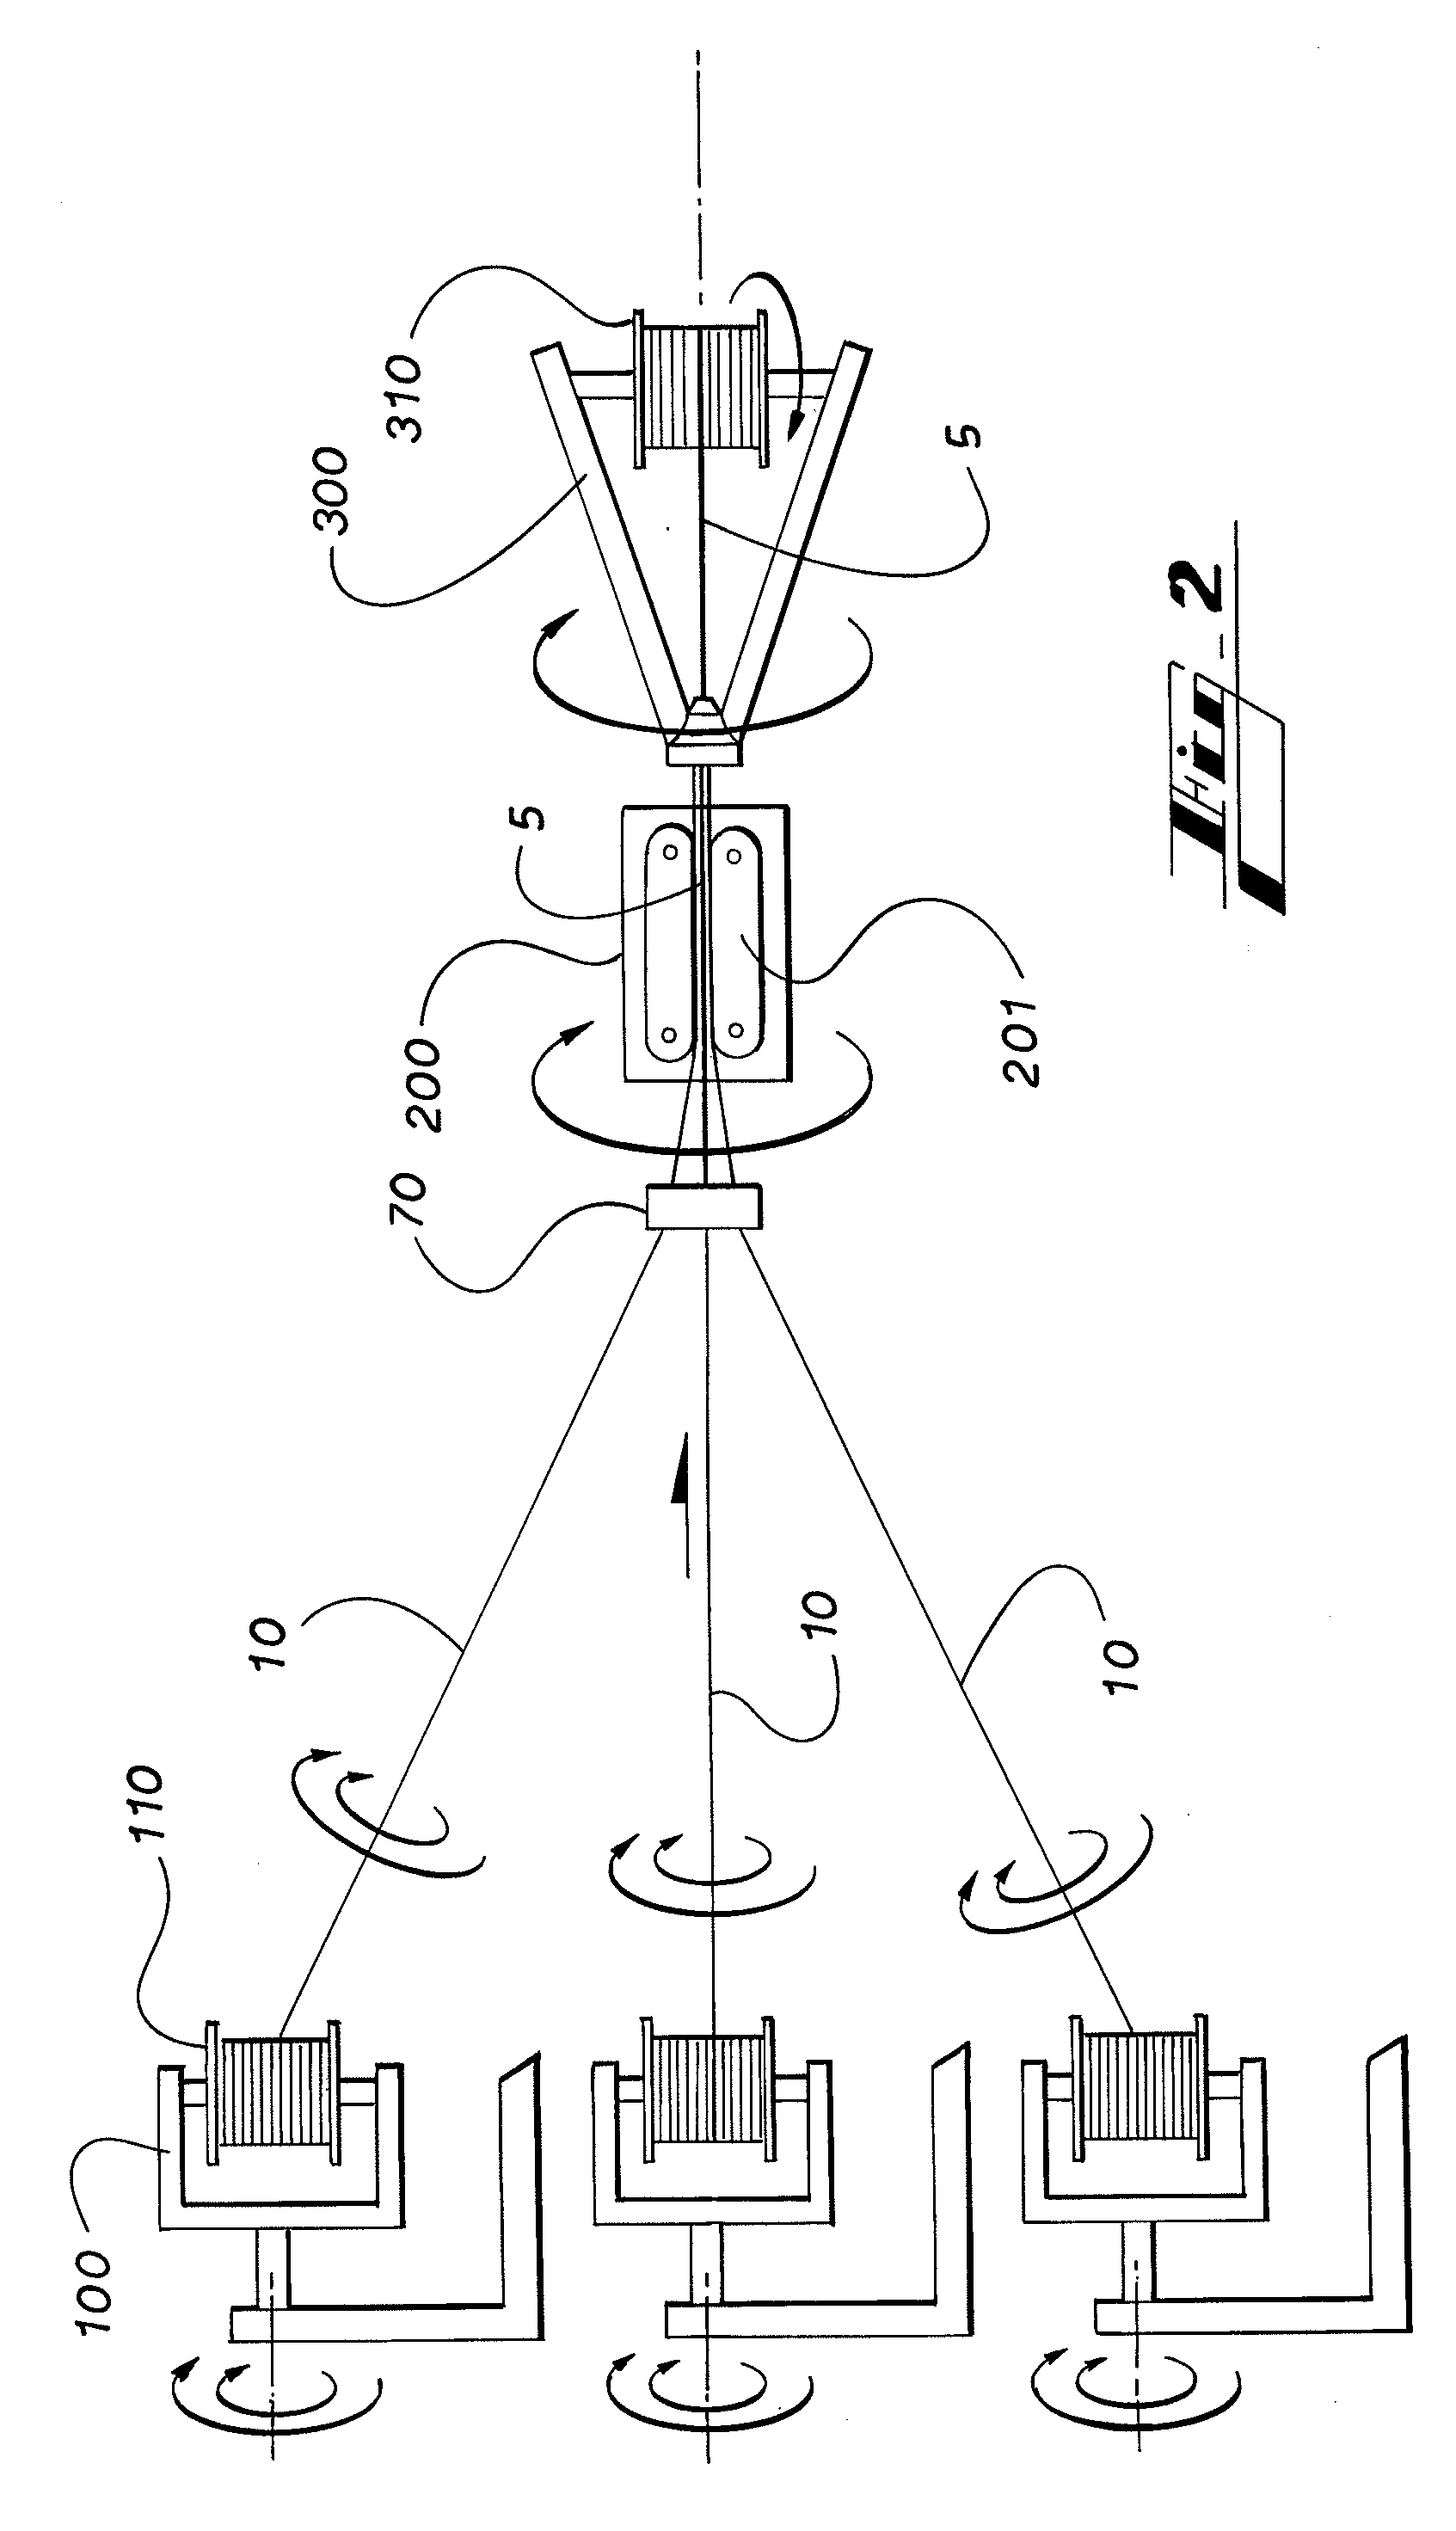 Multi-element twisted assembly and method using reverse axial torsion